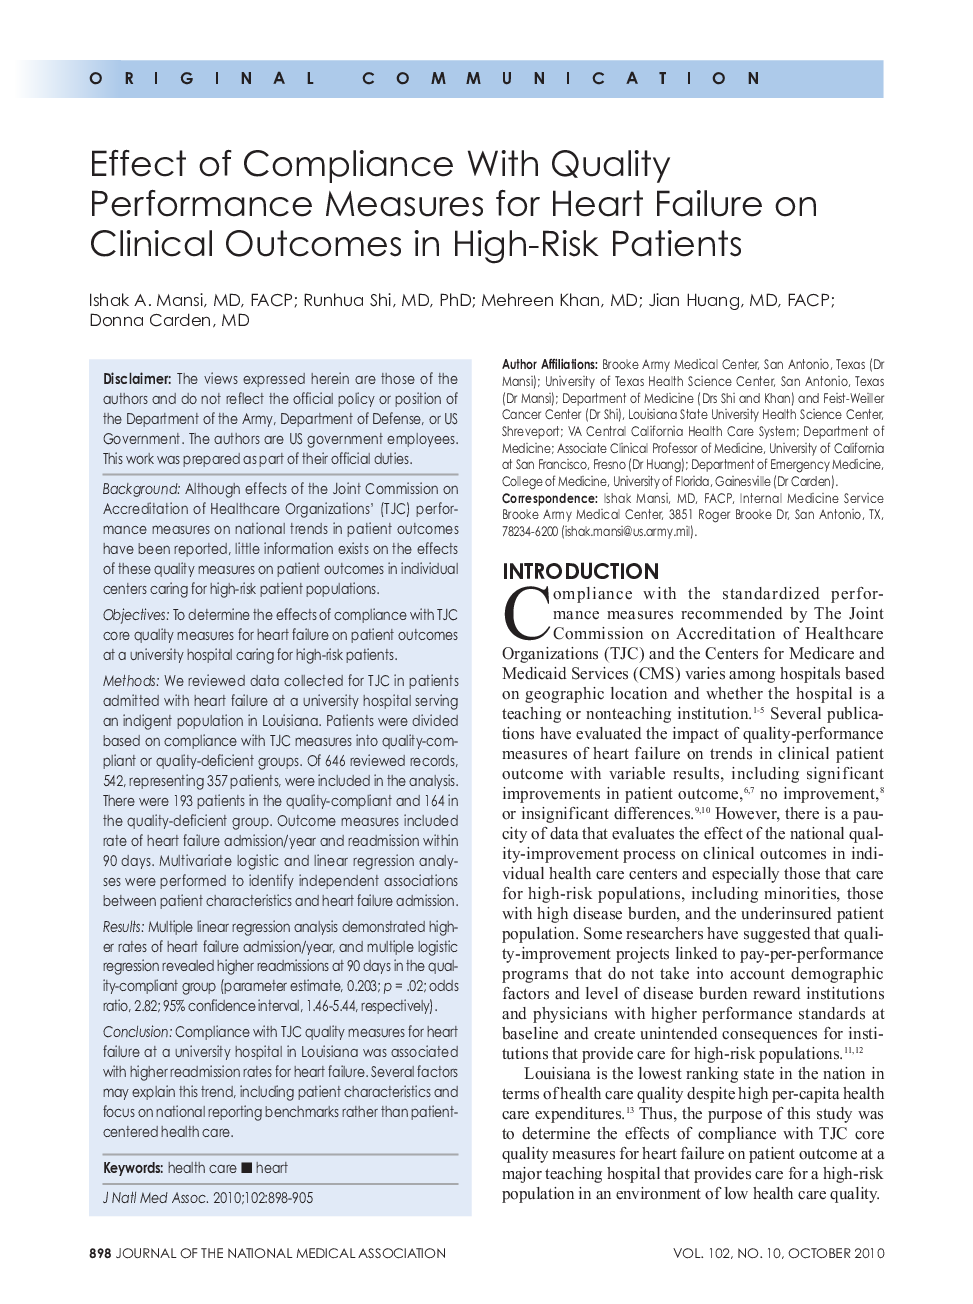 Effect of Compliance With Quality Performance Measures for Heart Failure on Clinical Outcomes in High-Risk Patients